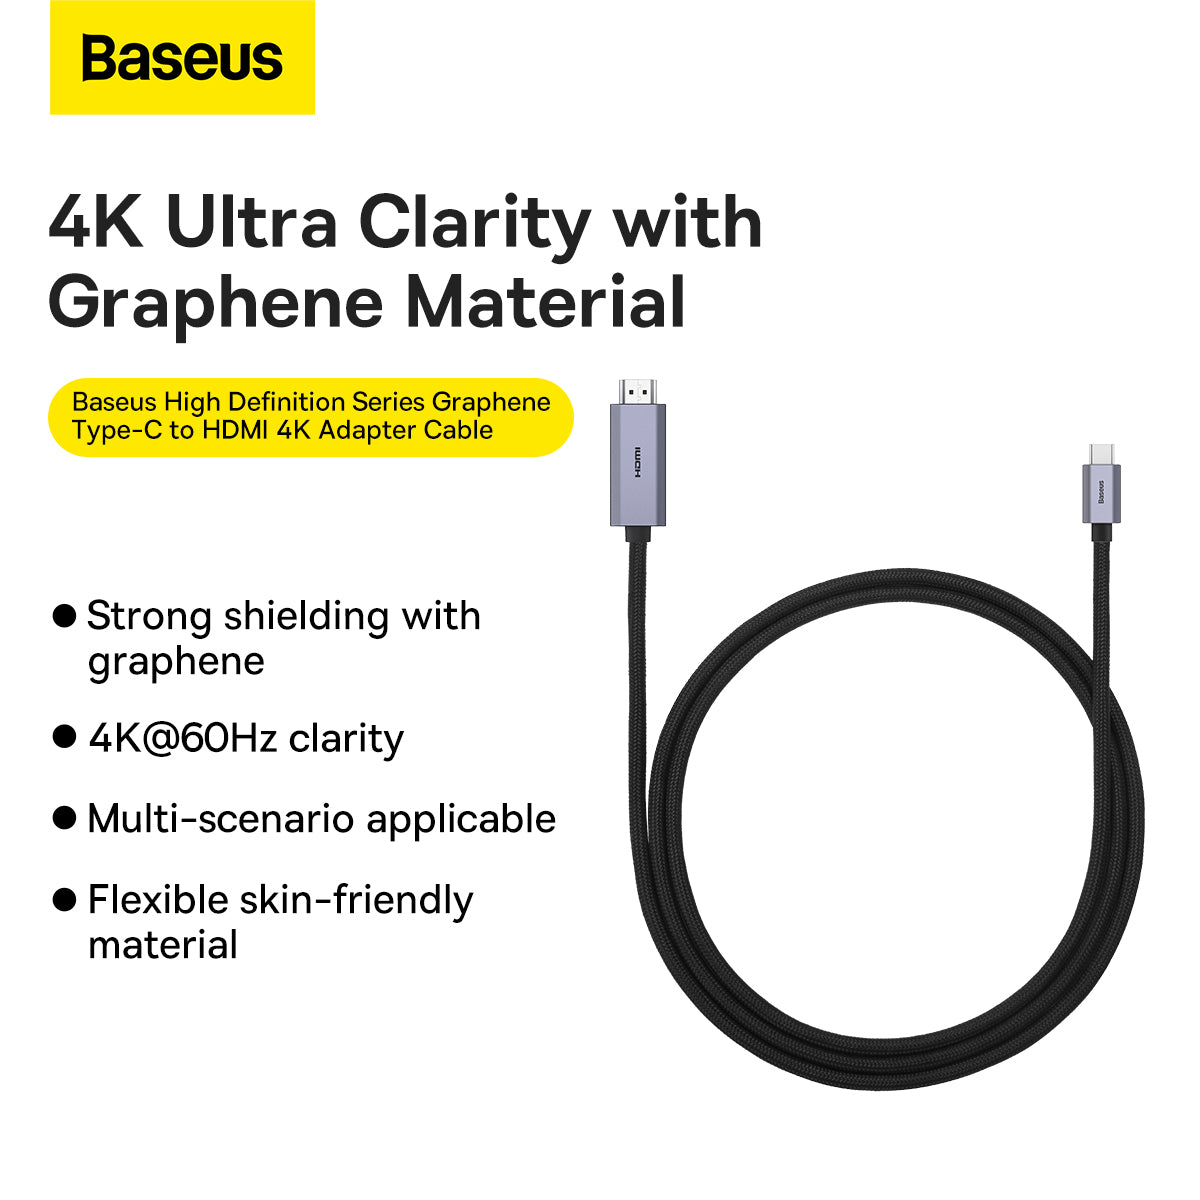 Baseus High Definition Series Type-C to HDMI 2.0 4K 60Hz Adapter 2M Cable